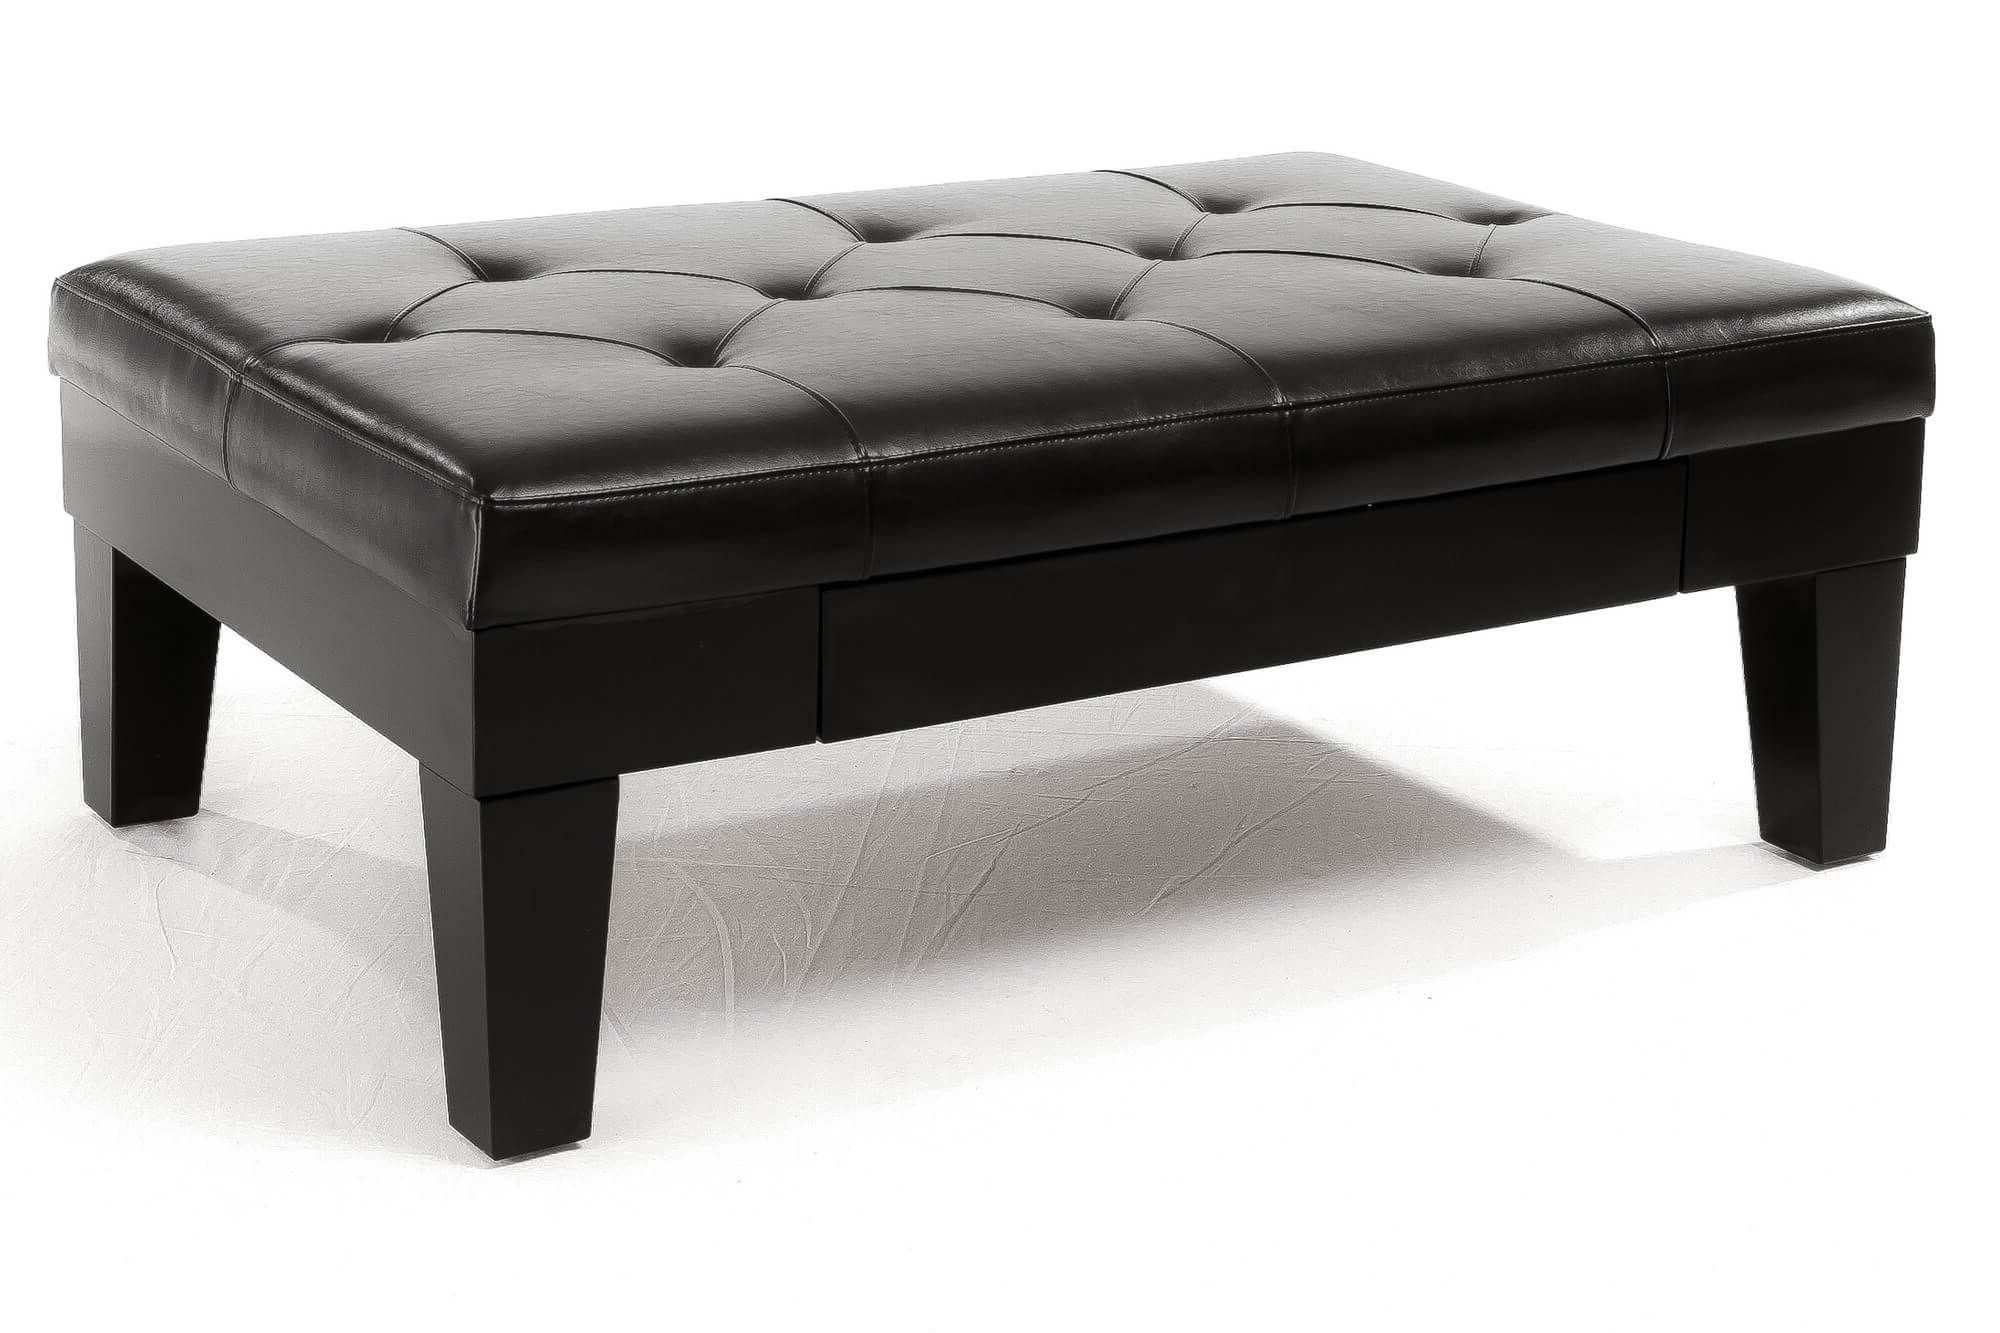 36 Top Brown Leather Ottoman Coffee Tables Intended For Current Button Tufted Coffee Tables (Gallery 12 of 20)